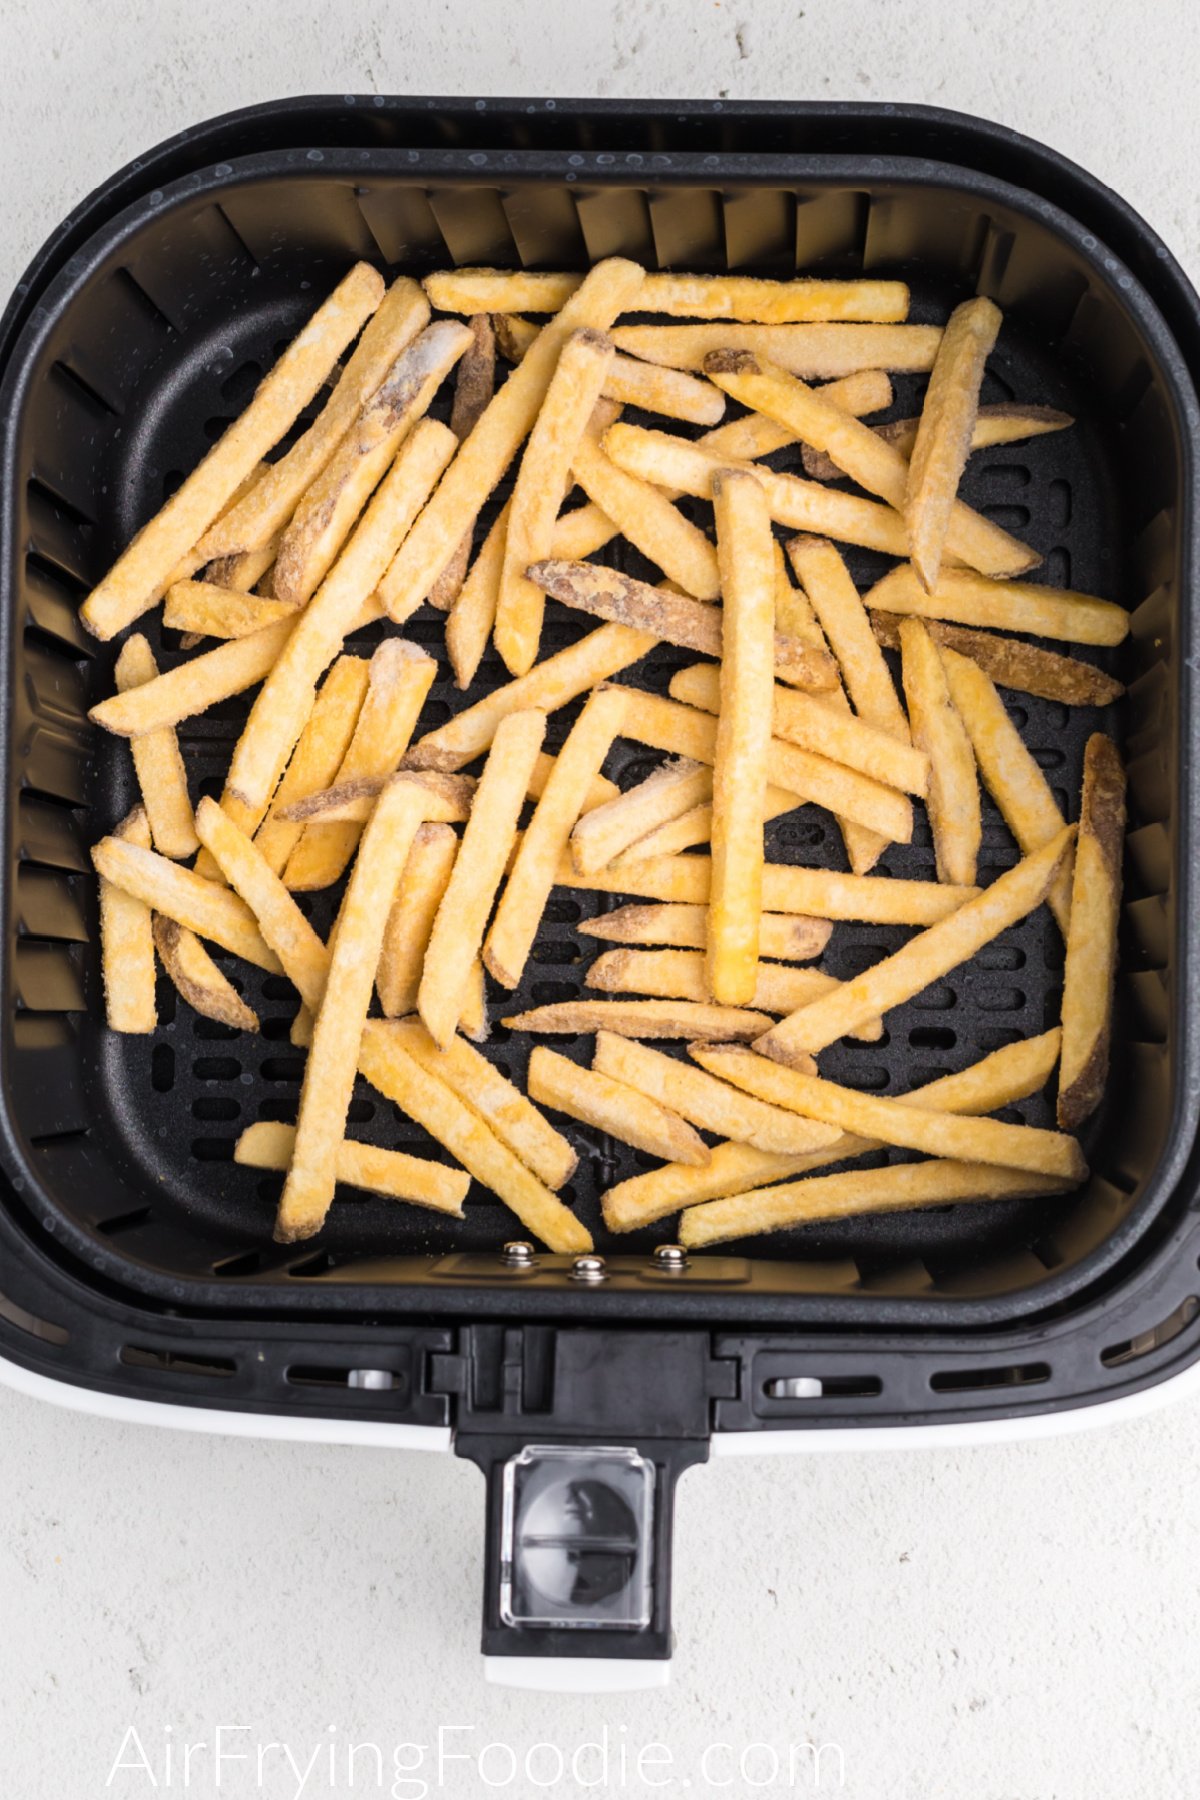 frozen fries in the basket of the air fryer.